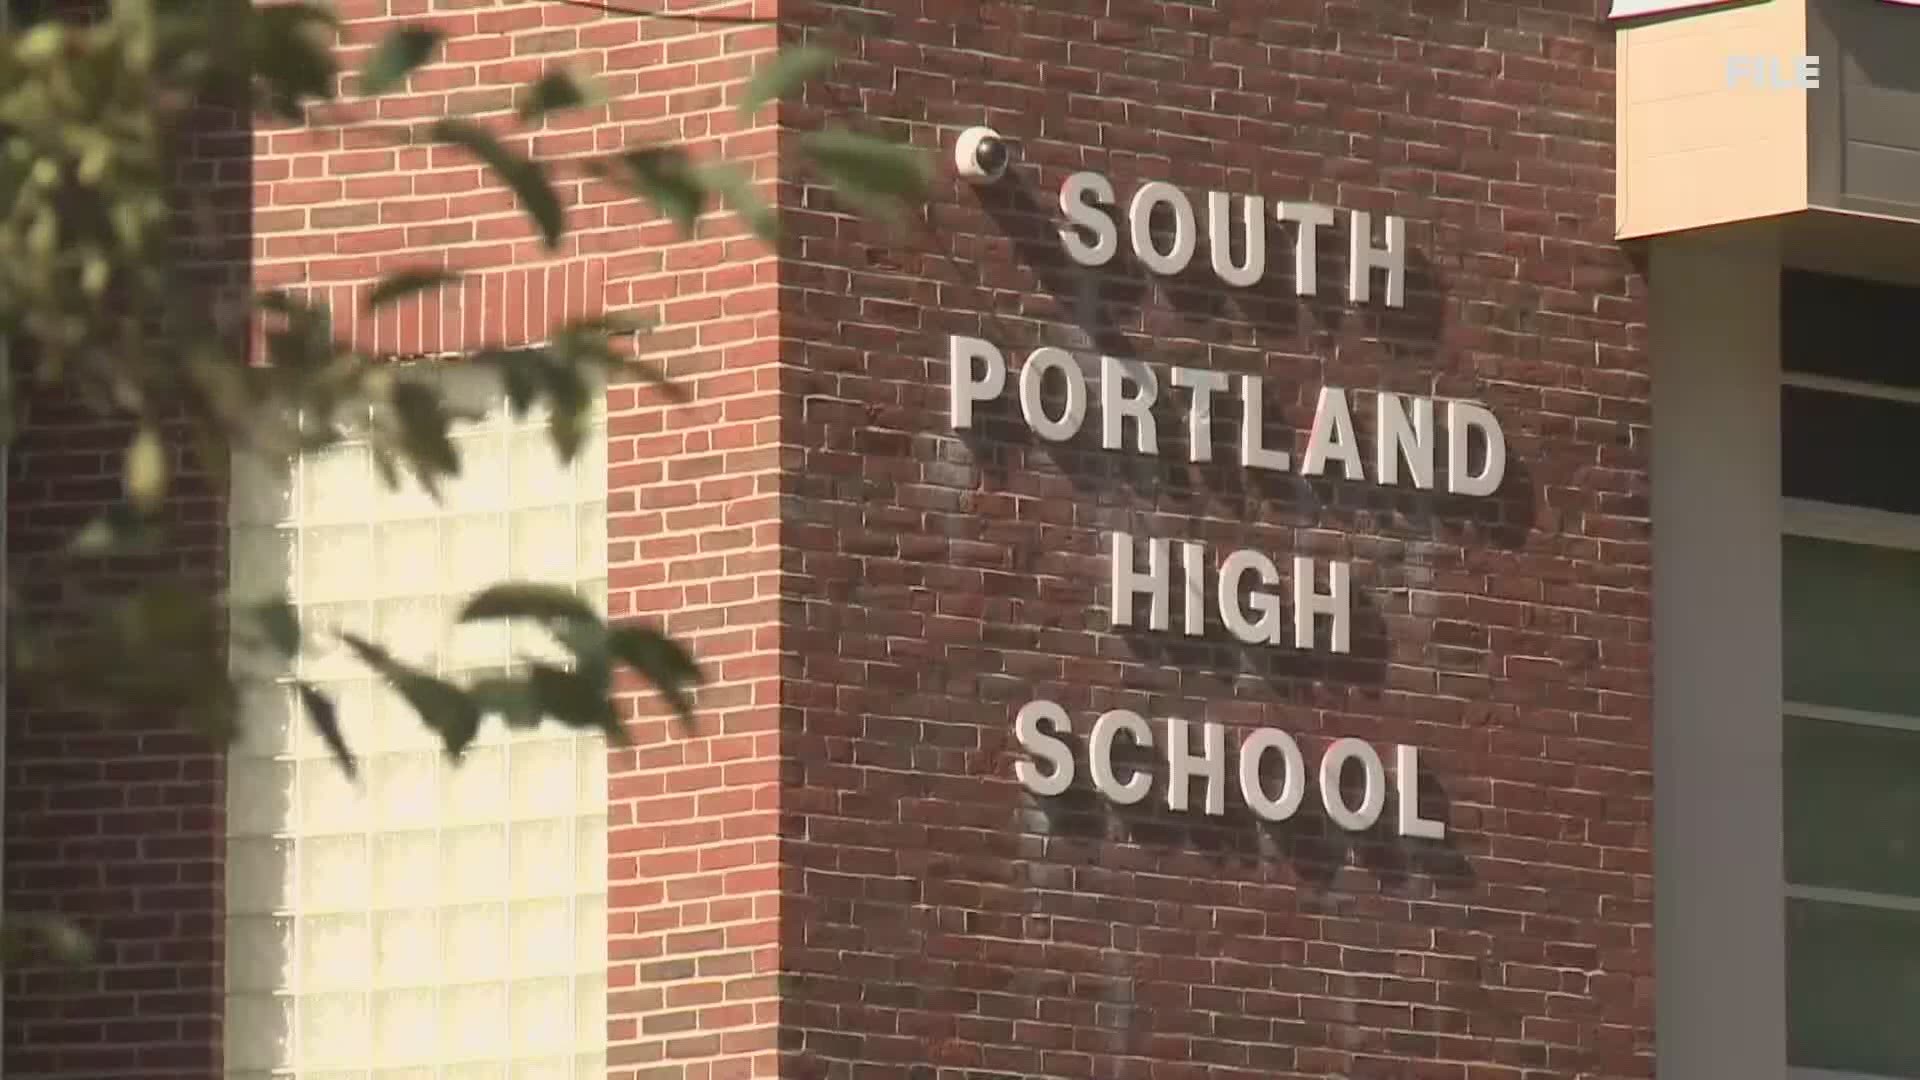 According to the South Portland School Department, there are four to five times more homeless students this year compared to previous years due to the pandemic.